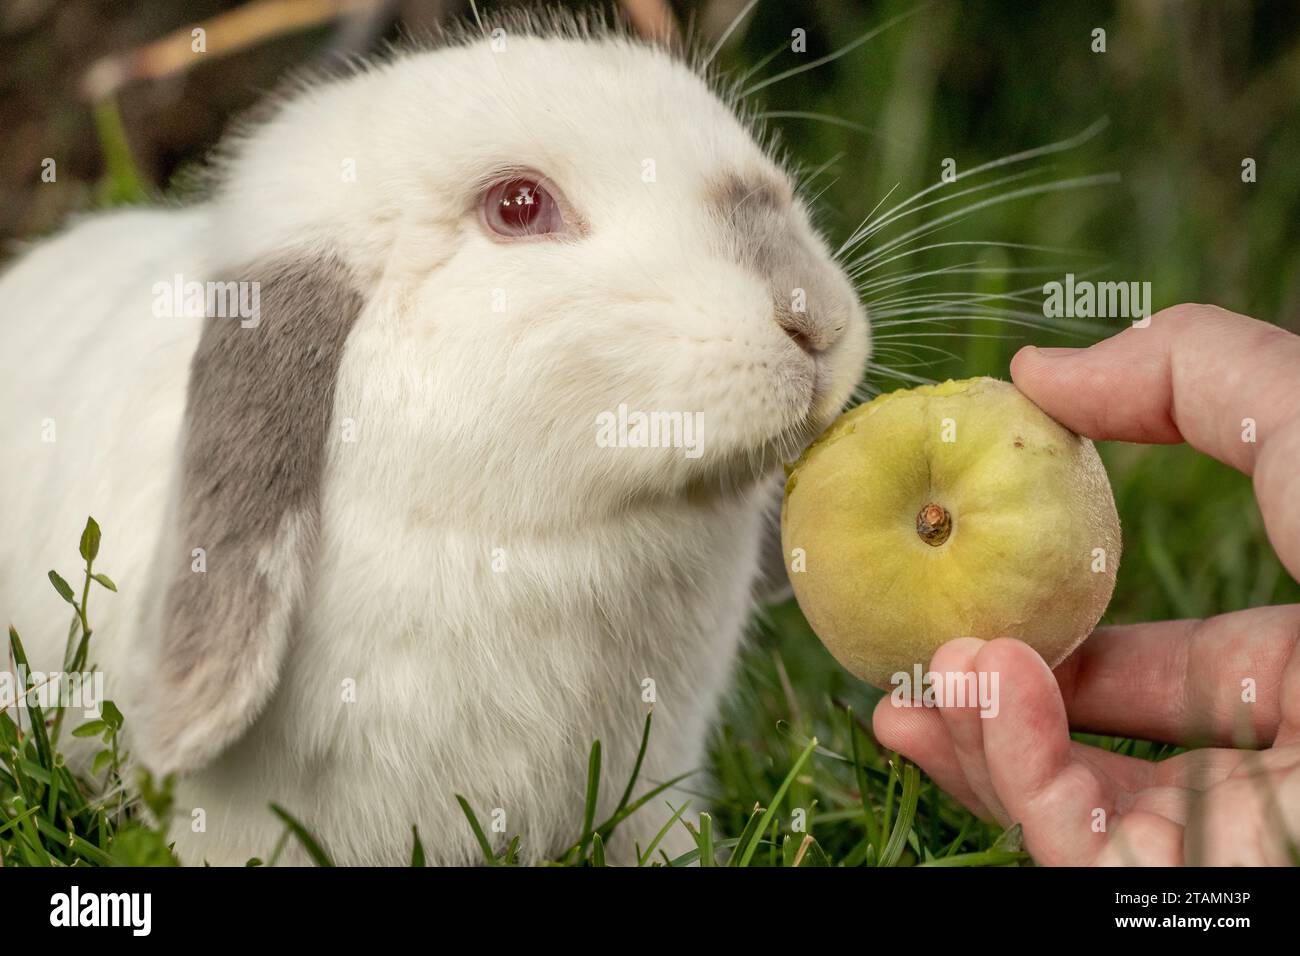 White Holland Lop Rabbit Bunny Albino Californian Siamese Red Eyes Flop Ear Close Up Eating Peach Sniffing Stock Photo